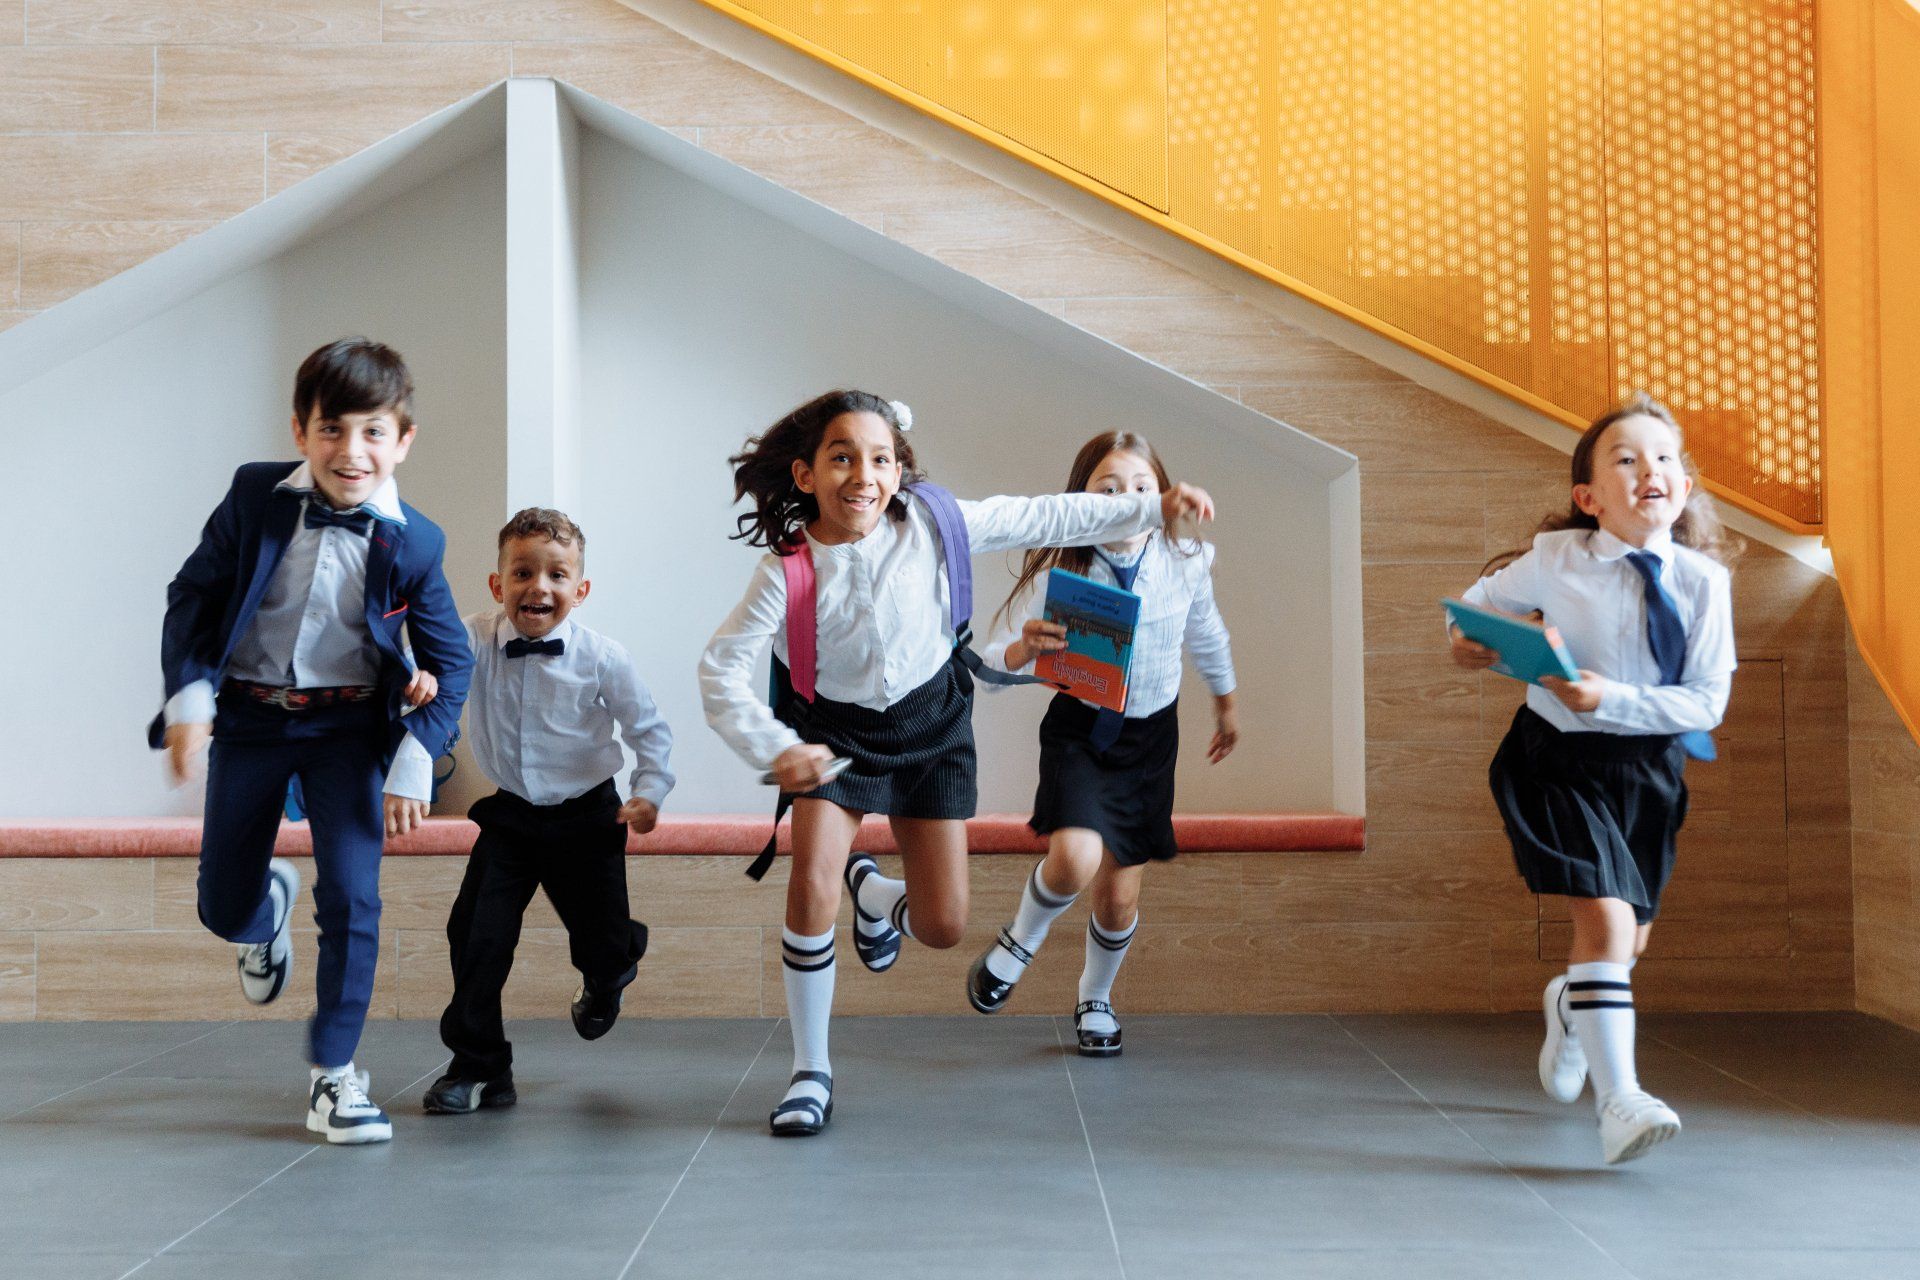 A group of children in school uniforms are running in a hallway.